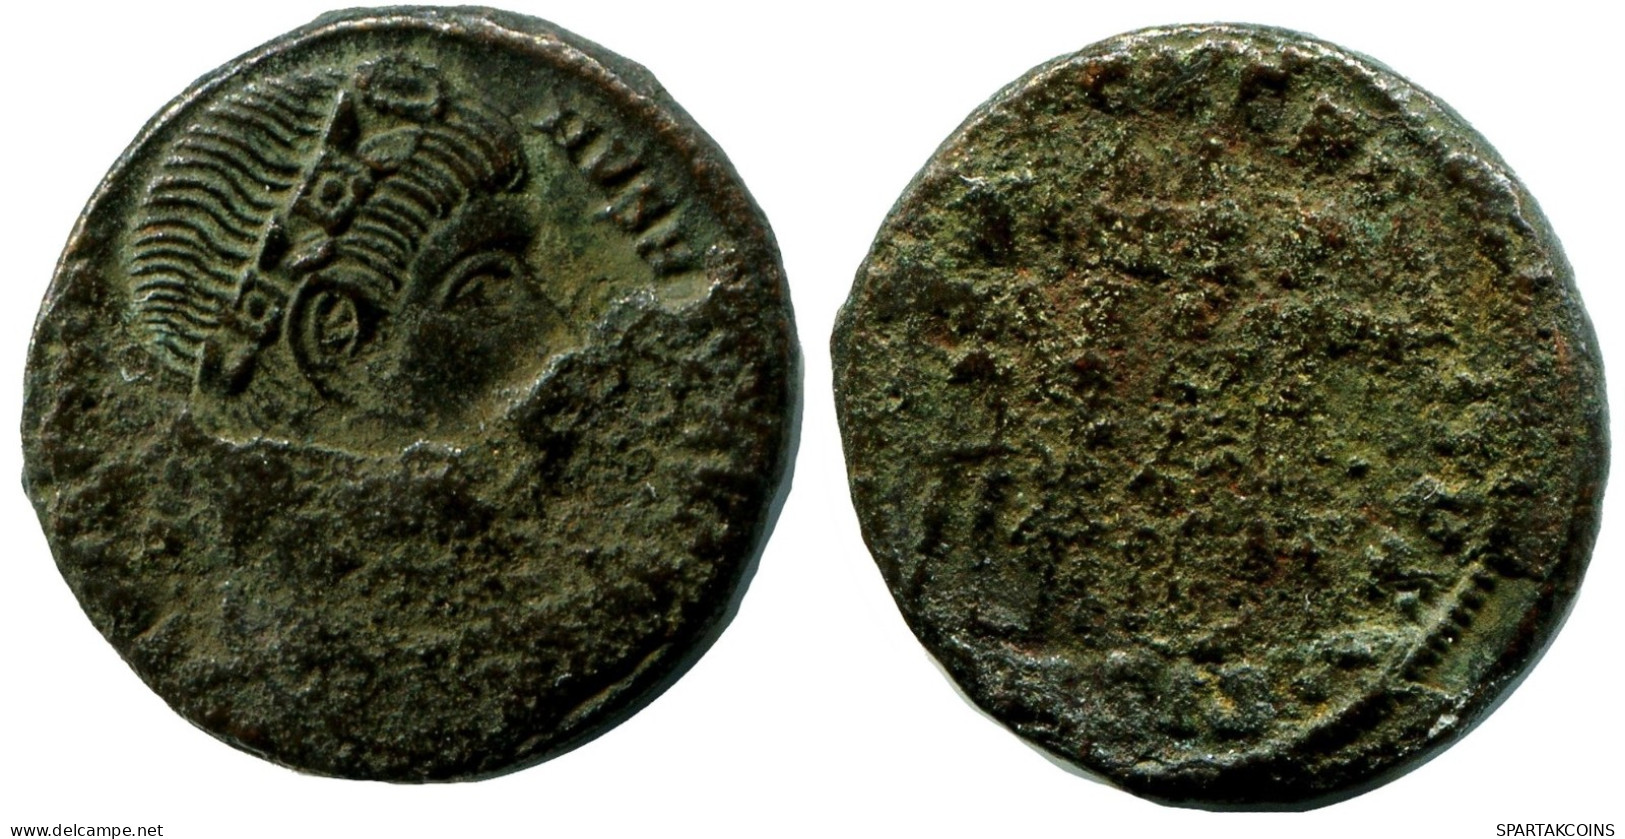 CONSTANTINE I MINTED IN FROM THE ROYAL ONTARIO MUSEUM #ANC11085.14.F.A - The Christian Empire (307 AD Tot 363 AD)